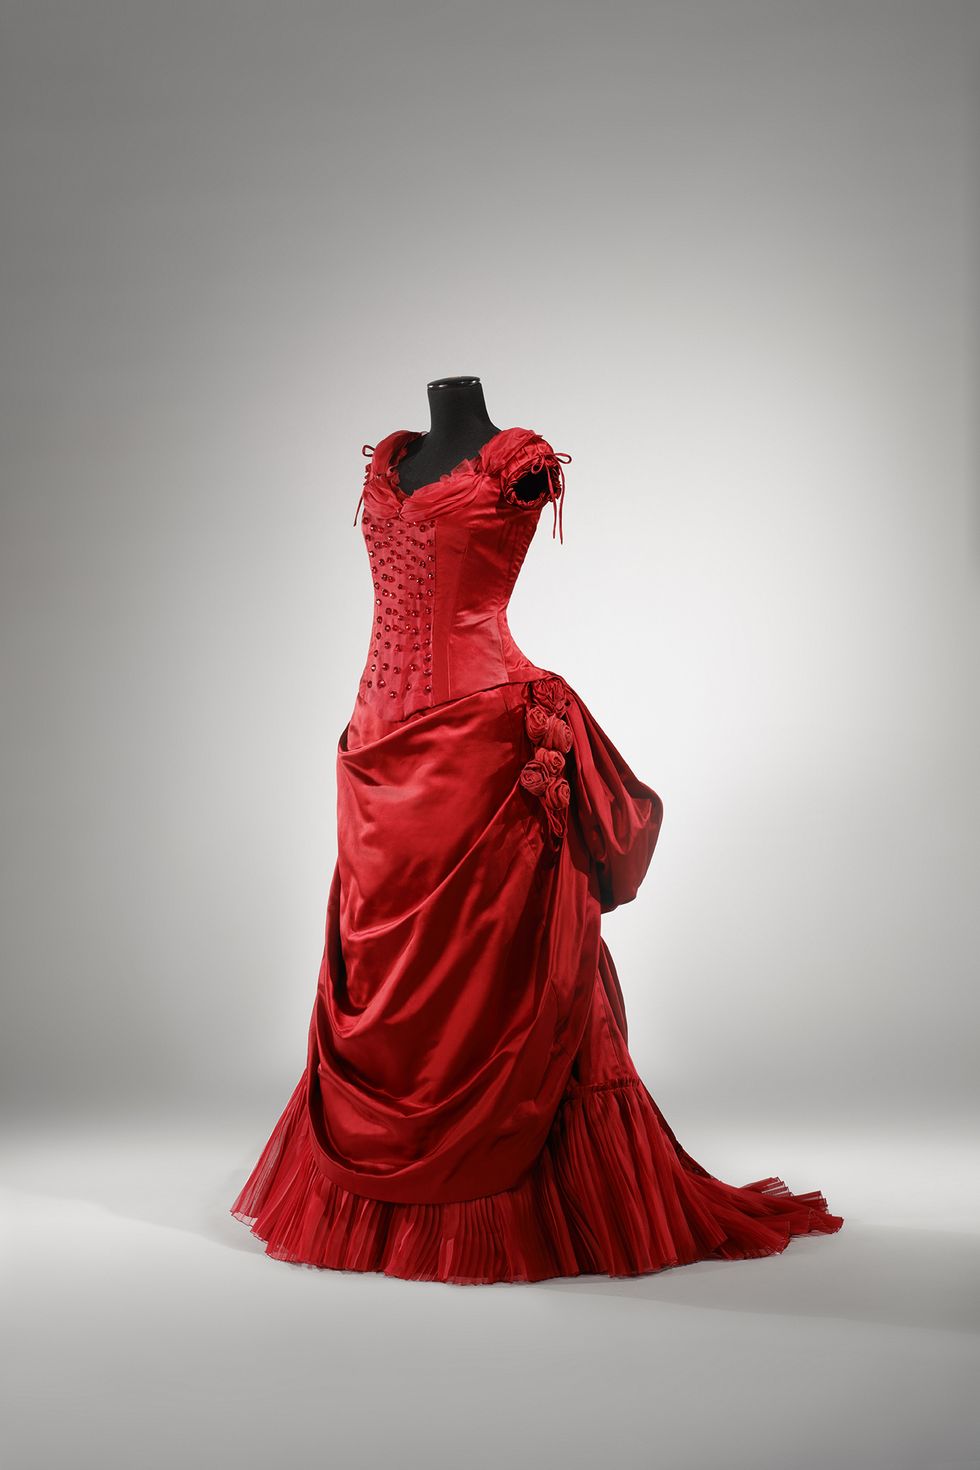 Gown, Dress, Red, Clothing, Shoulder, Fashion, Formal wear, Fashion model, Haute couture, Joint, 